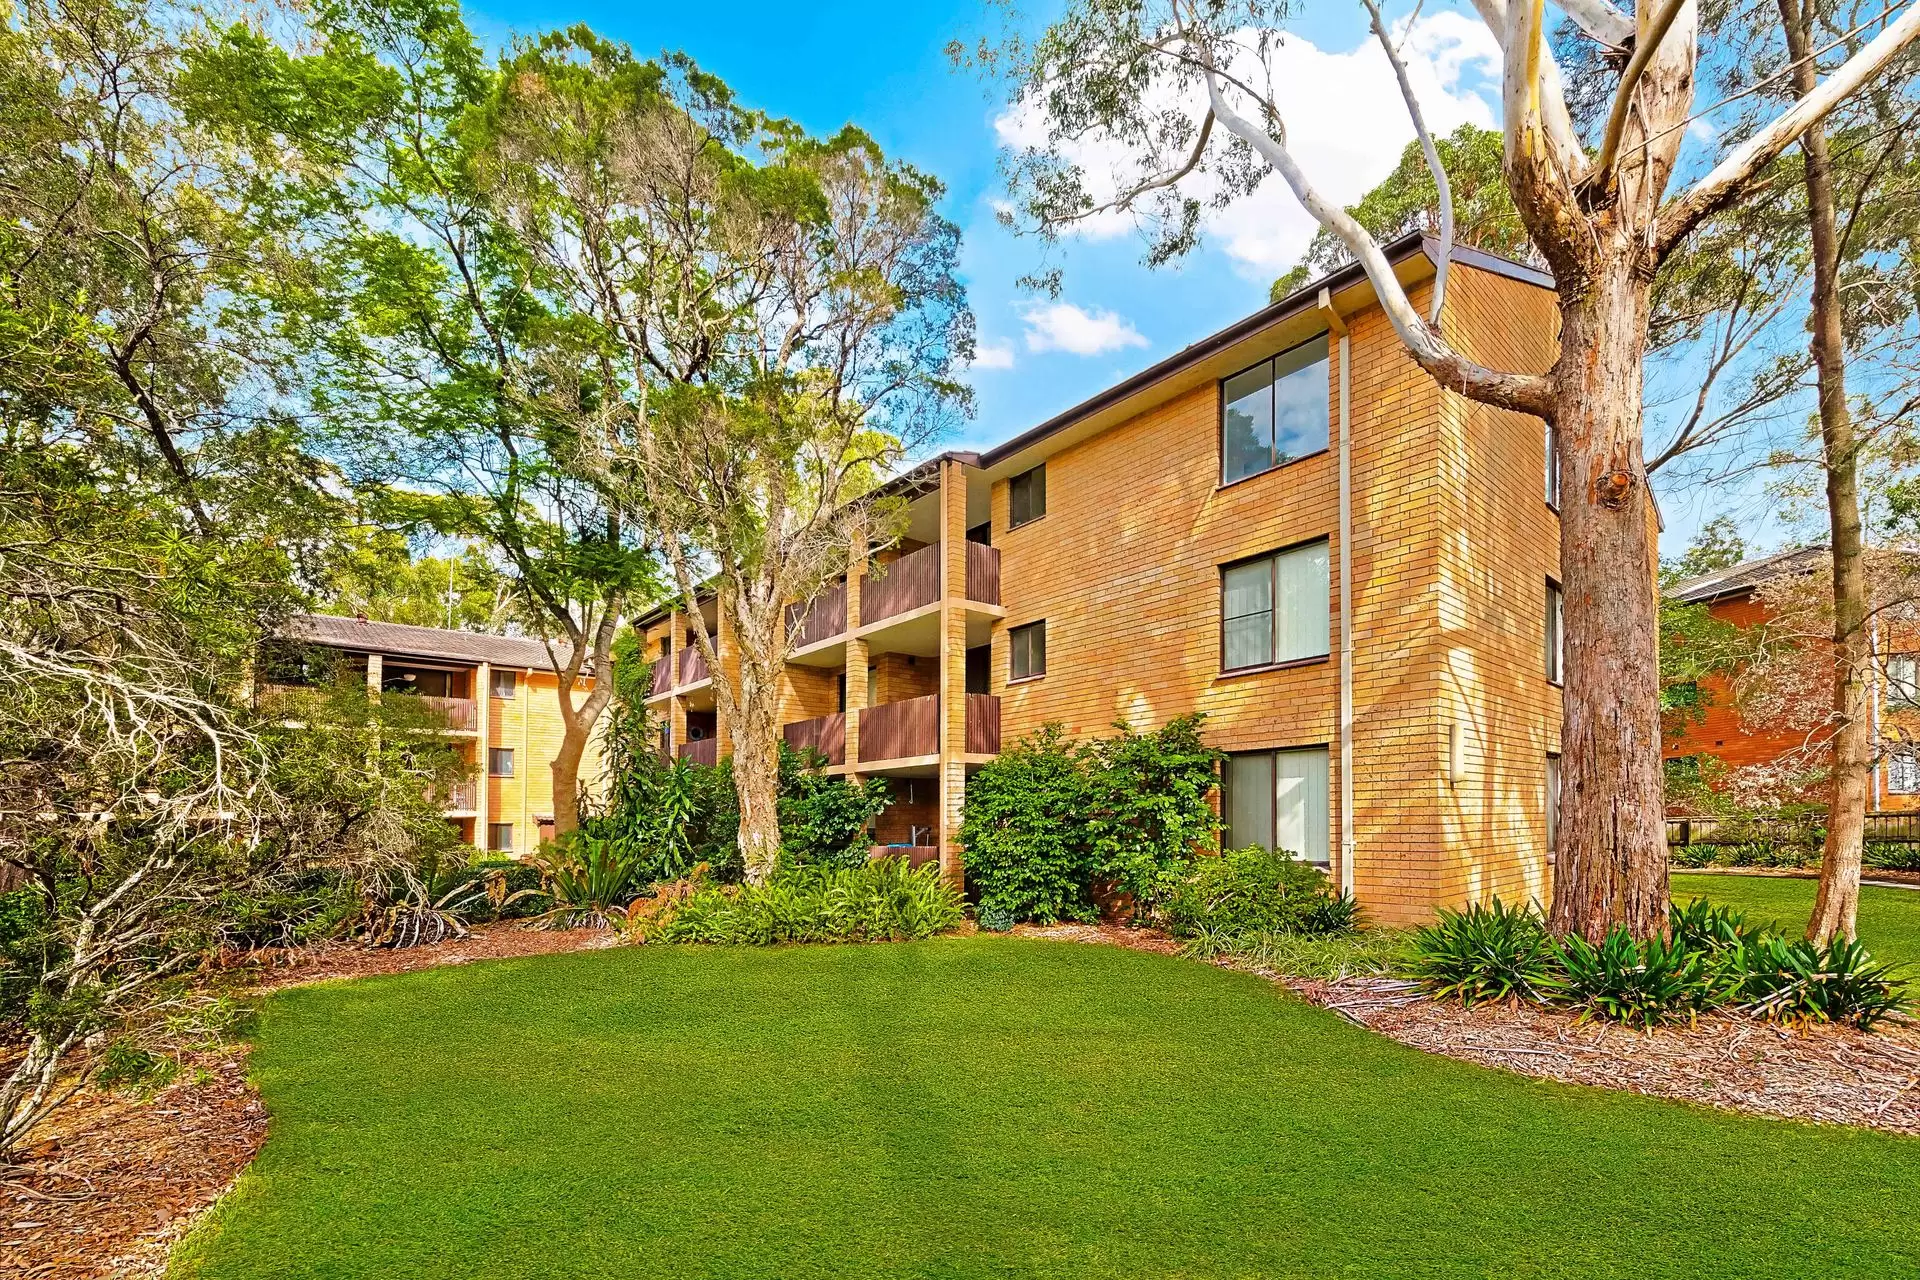 53/35-39 Fontenoy Road, Macquarie Park For Lease by Cassidy Real Estate - image 1